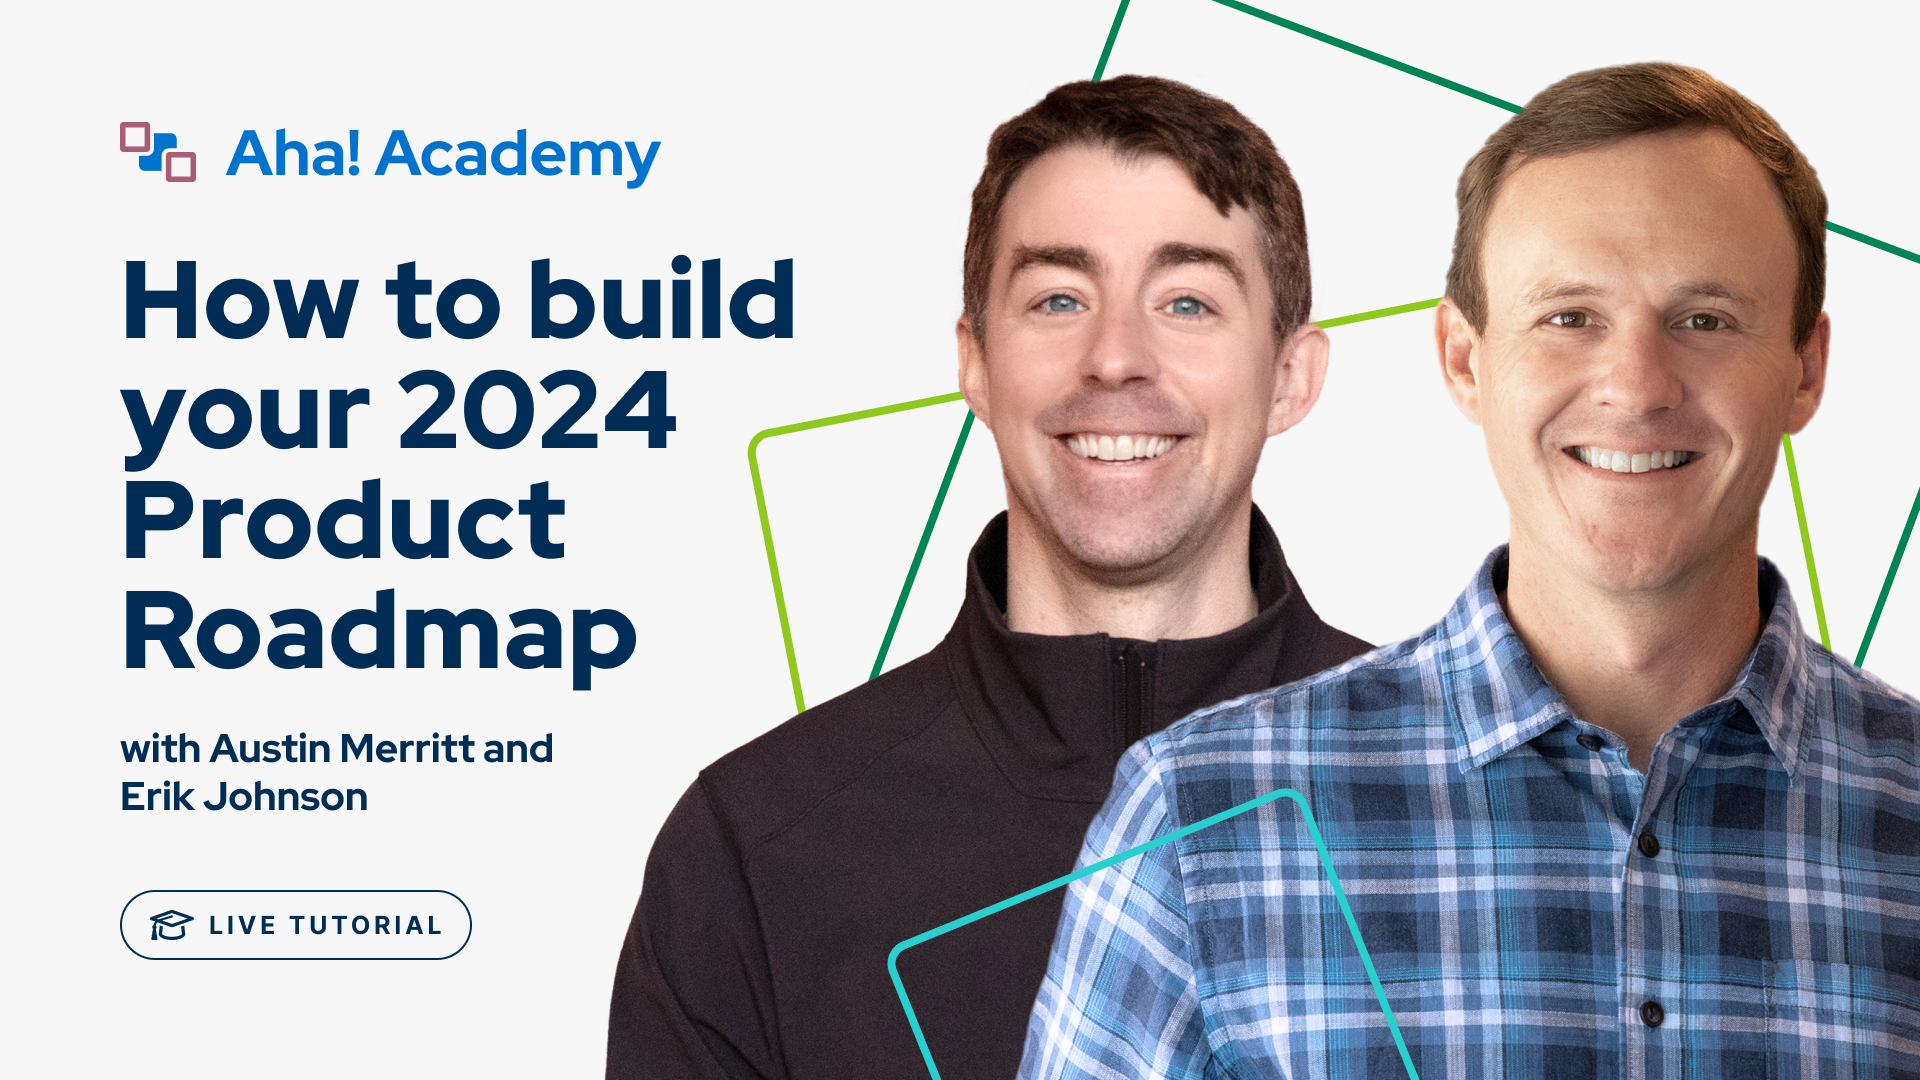 Thumbnail image for the tutorial about building a product roadmap in Aha! Roadmaps.